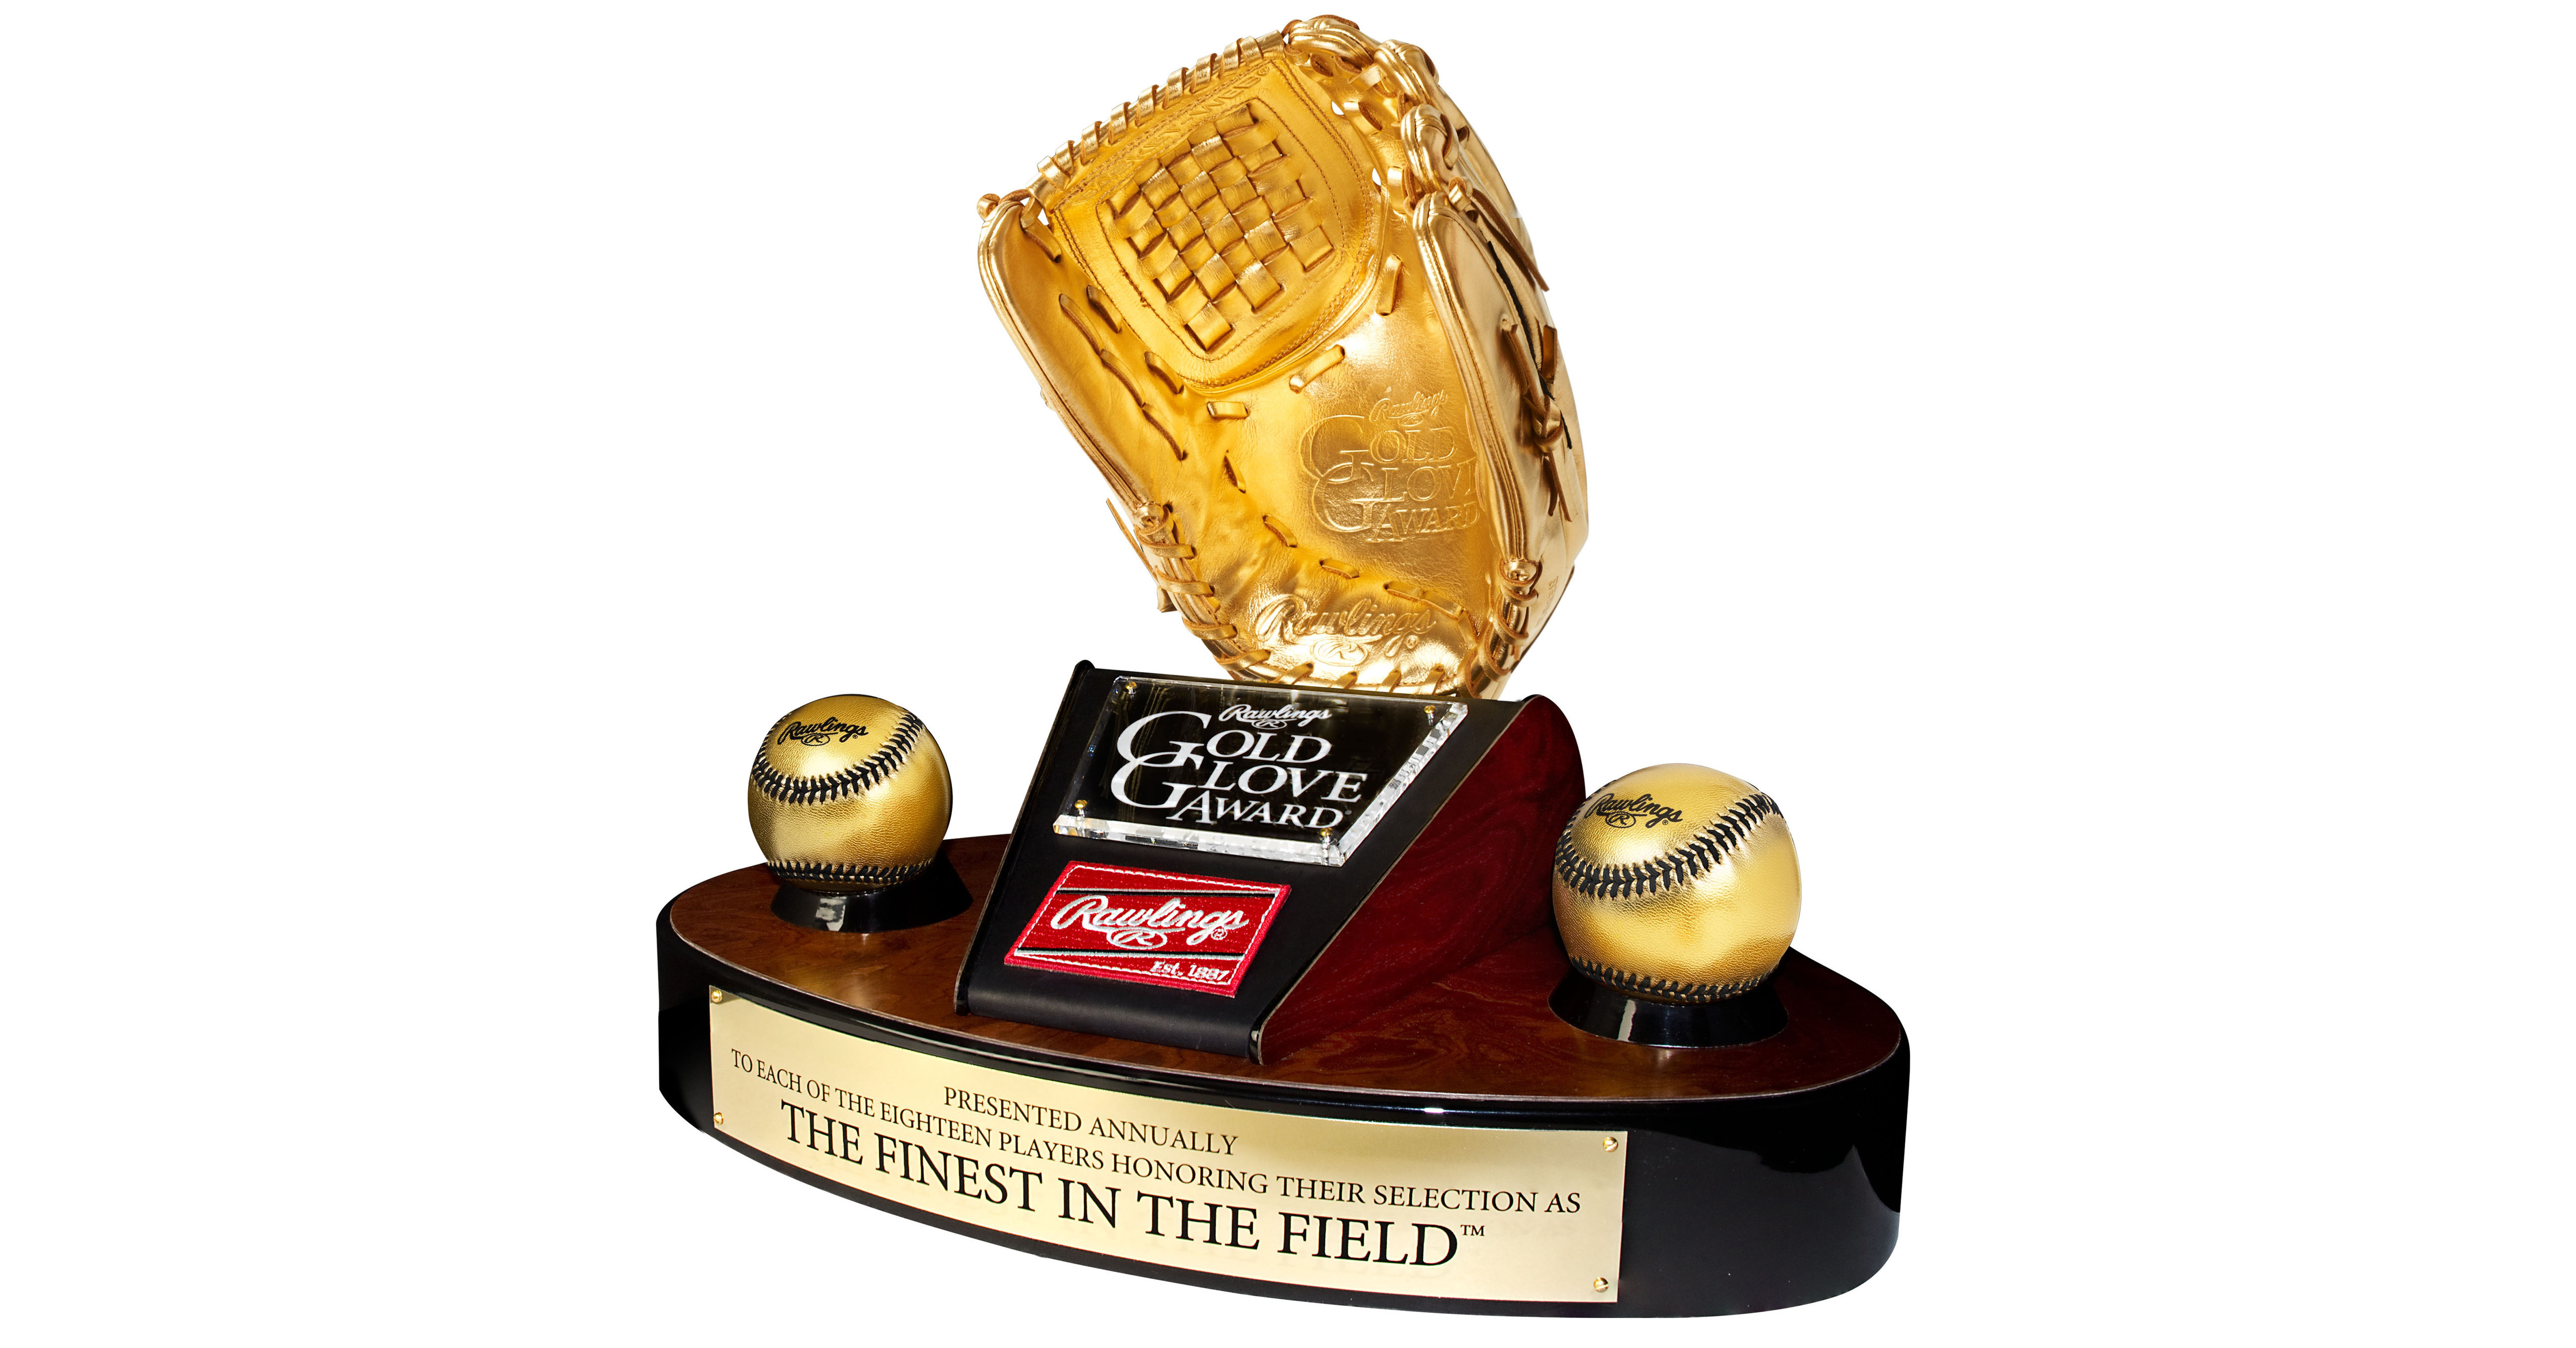 What Pros Wear: All 18 Gold Glove Winners and their Model - What Pros Wear